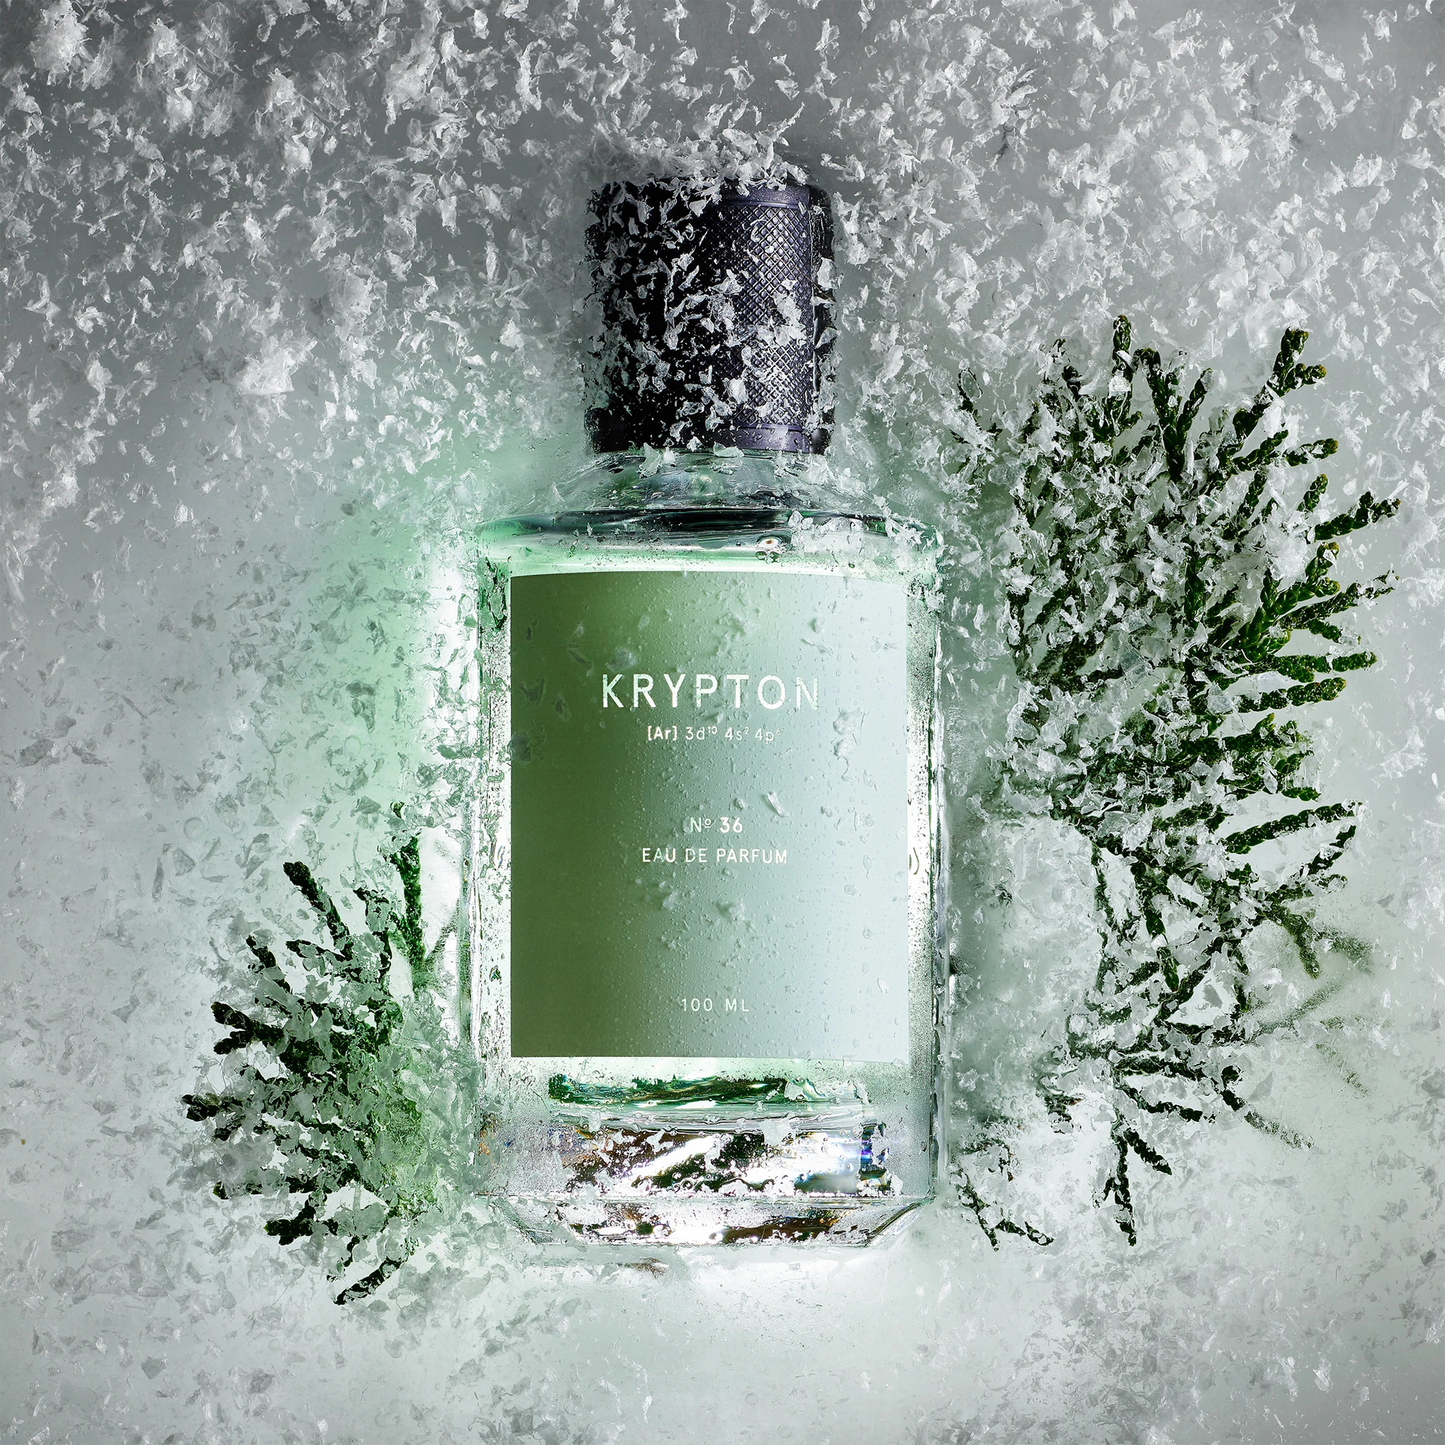 Sober Krypton No. 36 Perfume: A night full of promises that never ends: This is a men's perfume full of bold sensuality and refined elegance. In a world of night and shadow, it is seduction and temptation at the same time with its stimulating masculine scent. This long-lasting perfume is an unforgettable signature of a night when anything can happen. It beguiles with cardamom and cedarwood notes and a heart note of lavender and bergamot. The seductive fragrance is based on amber, caraway and vetiver.